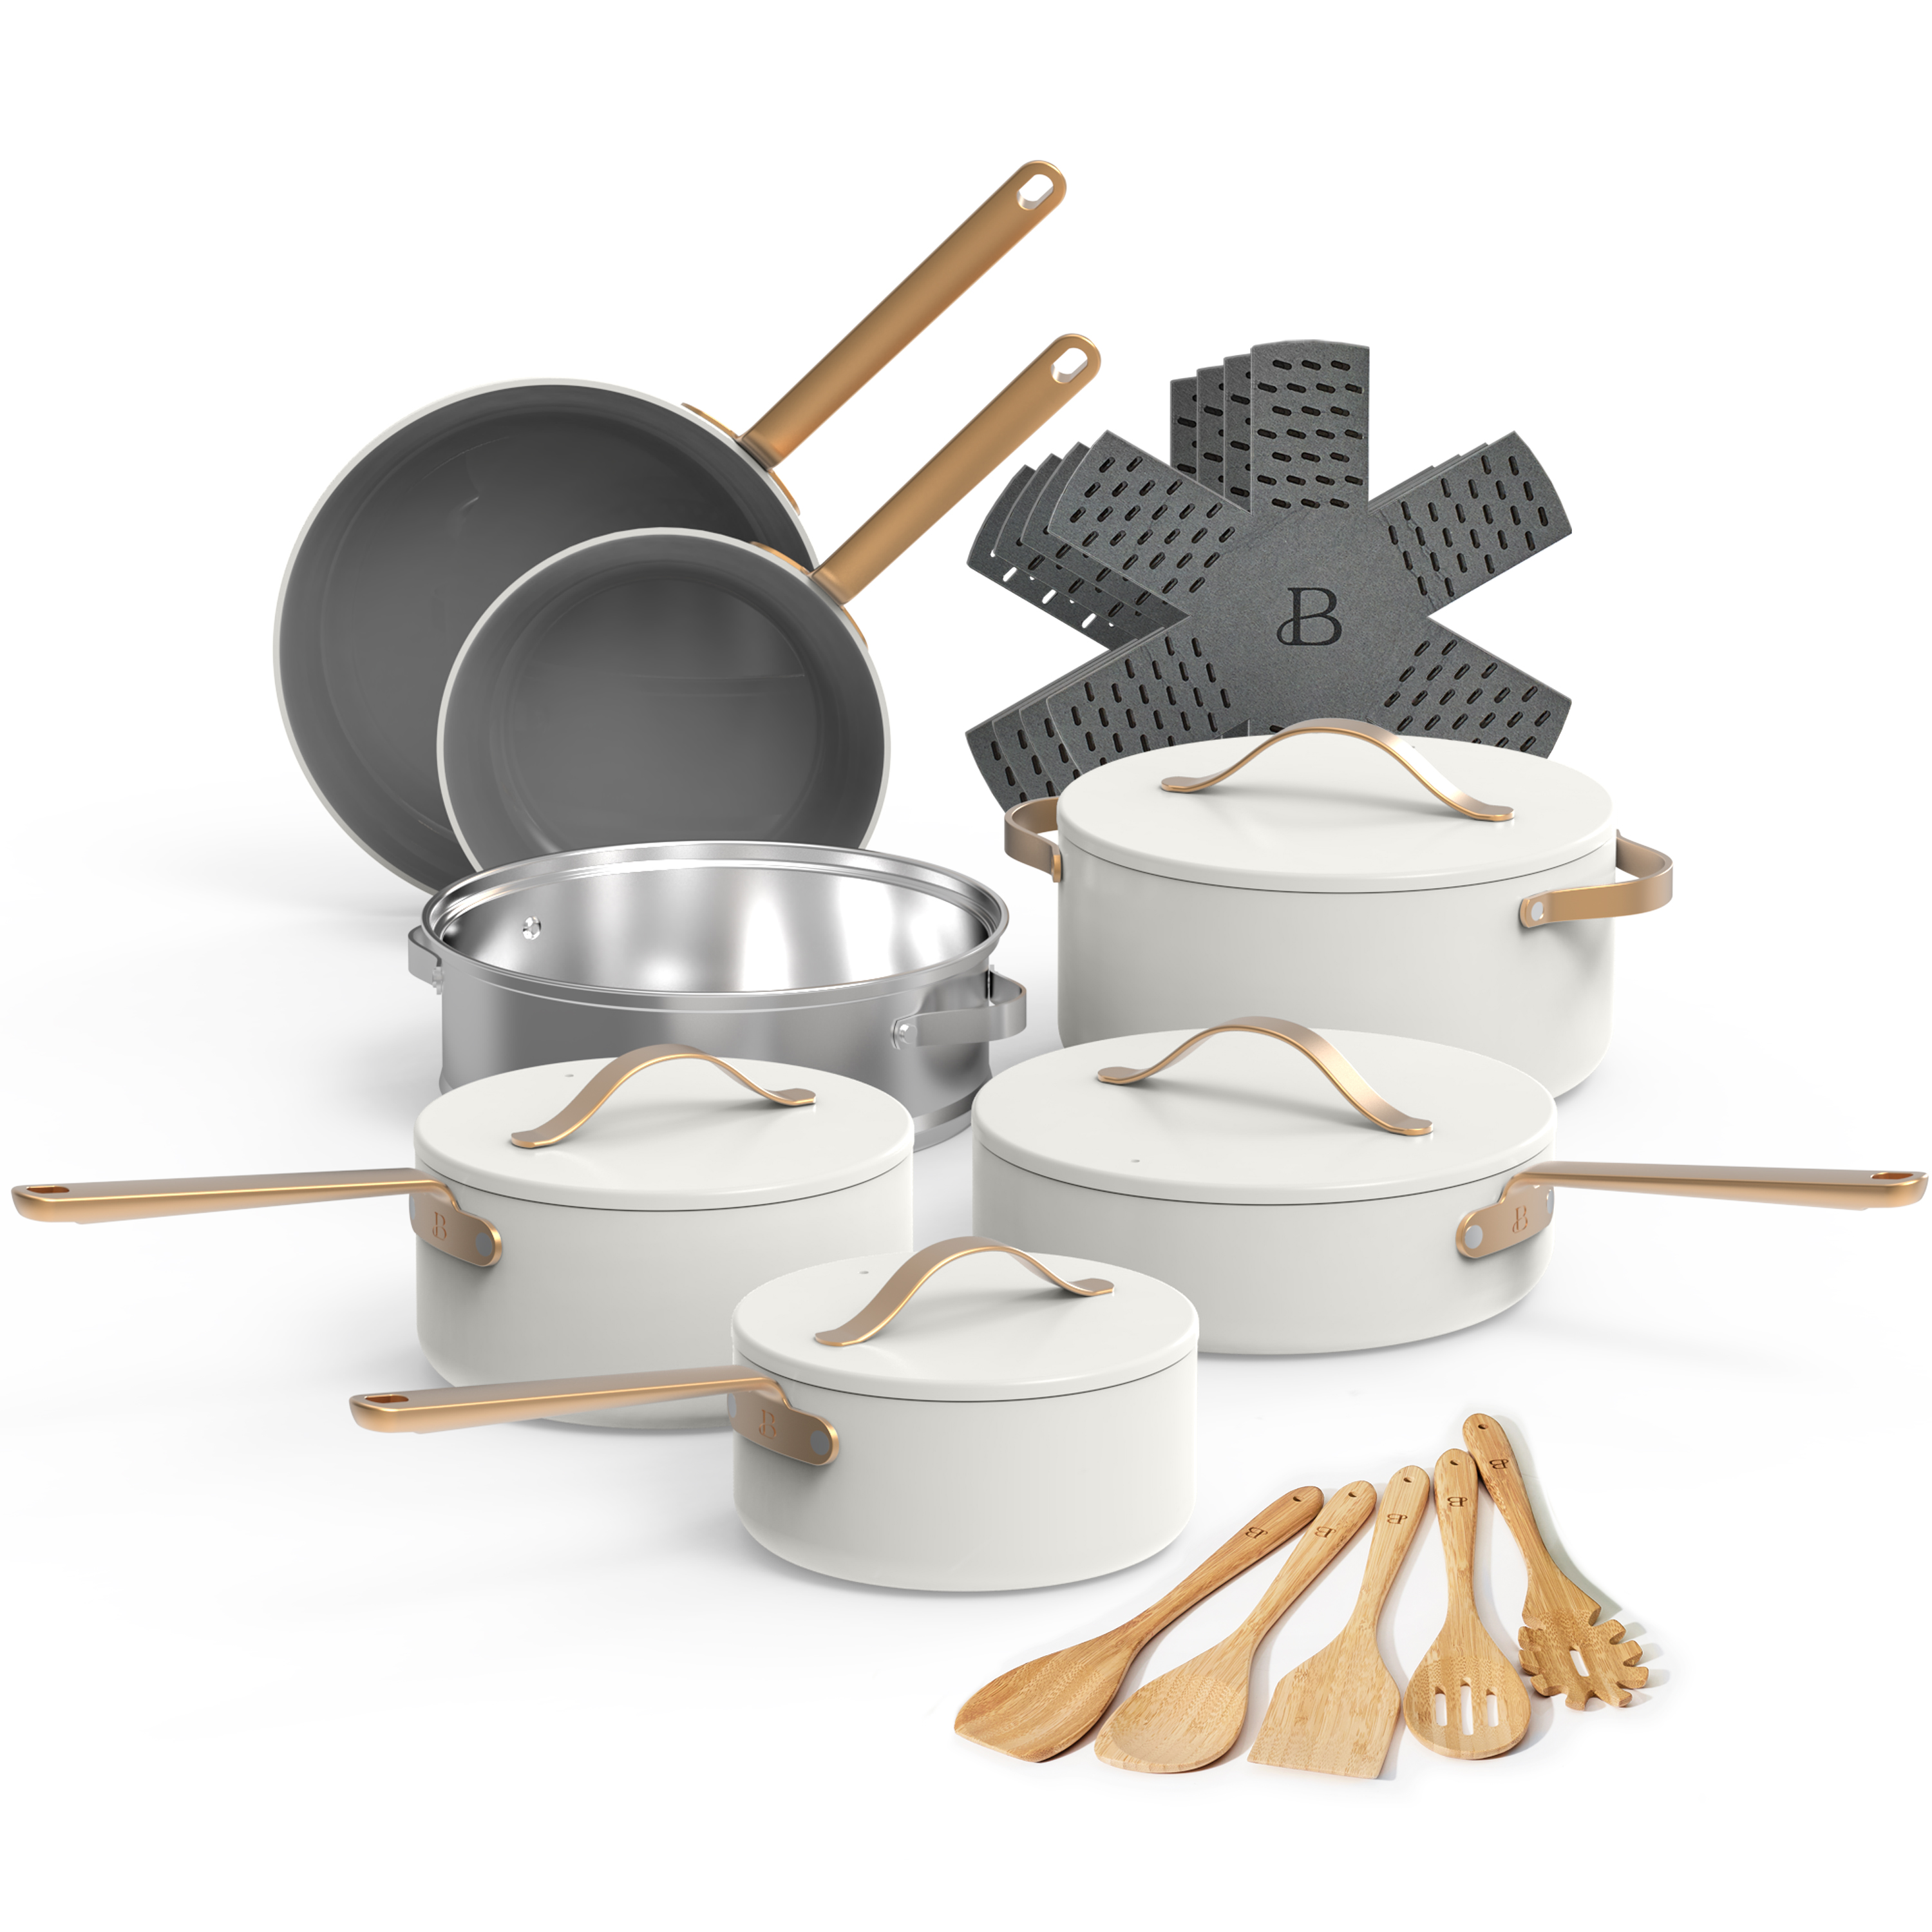 Beautiful 20pc Ceramic Non-Stick Cookware Set, White Icing by Drew Barrymore - image 1 of 7